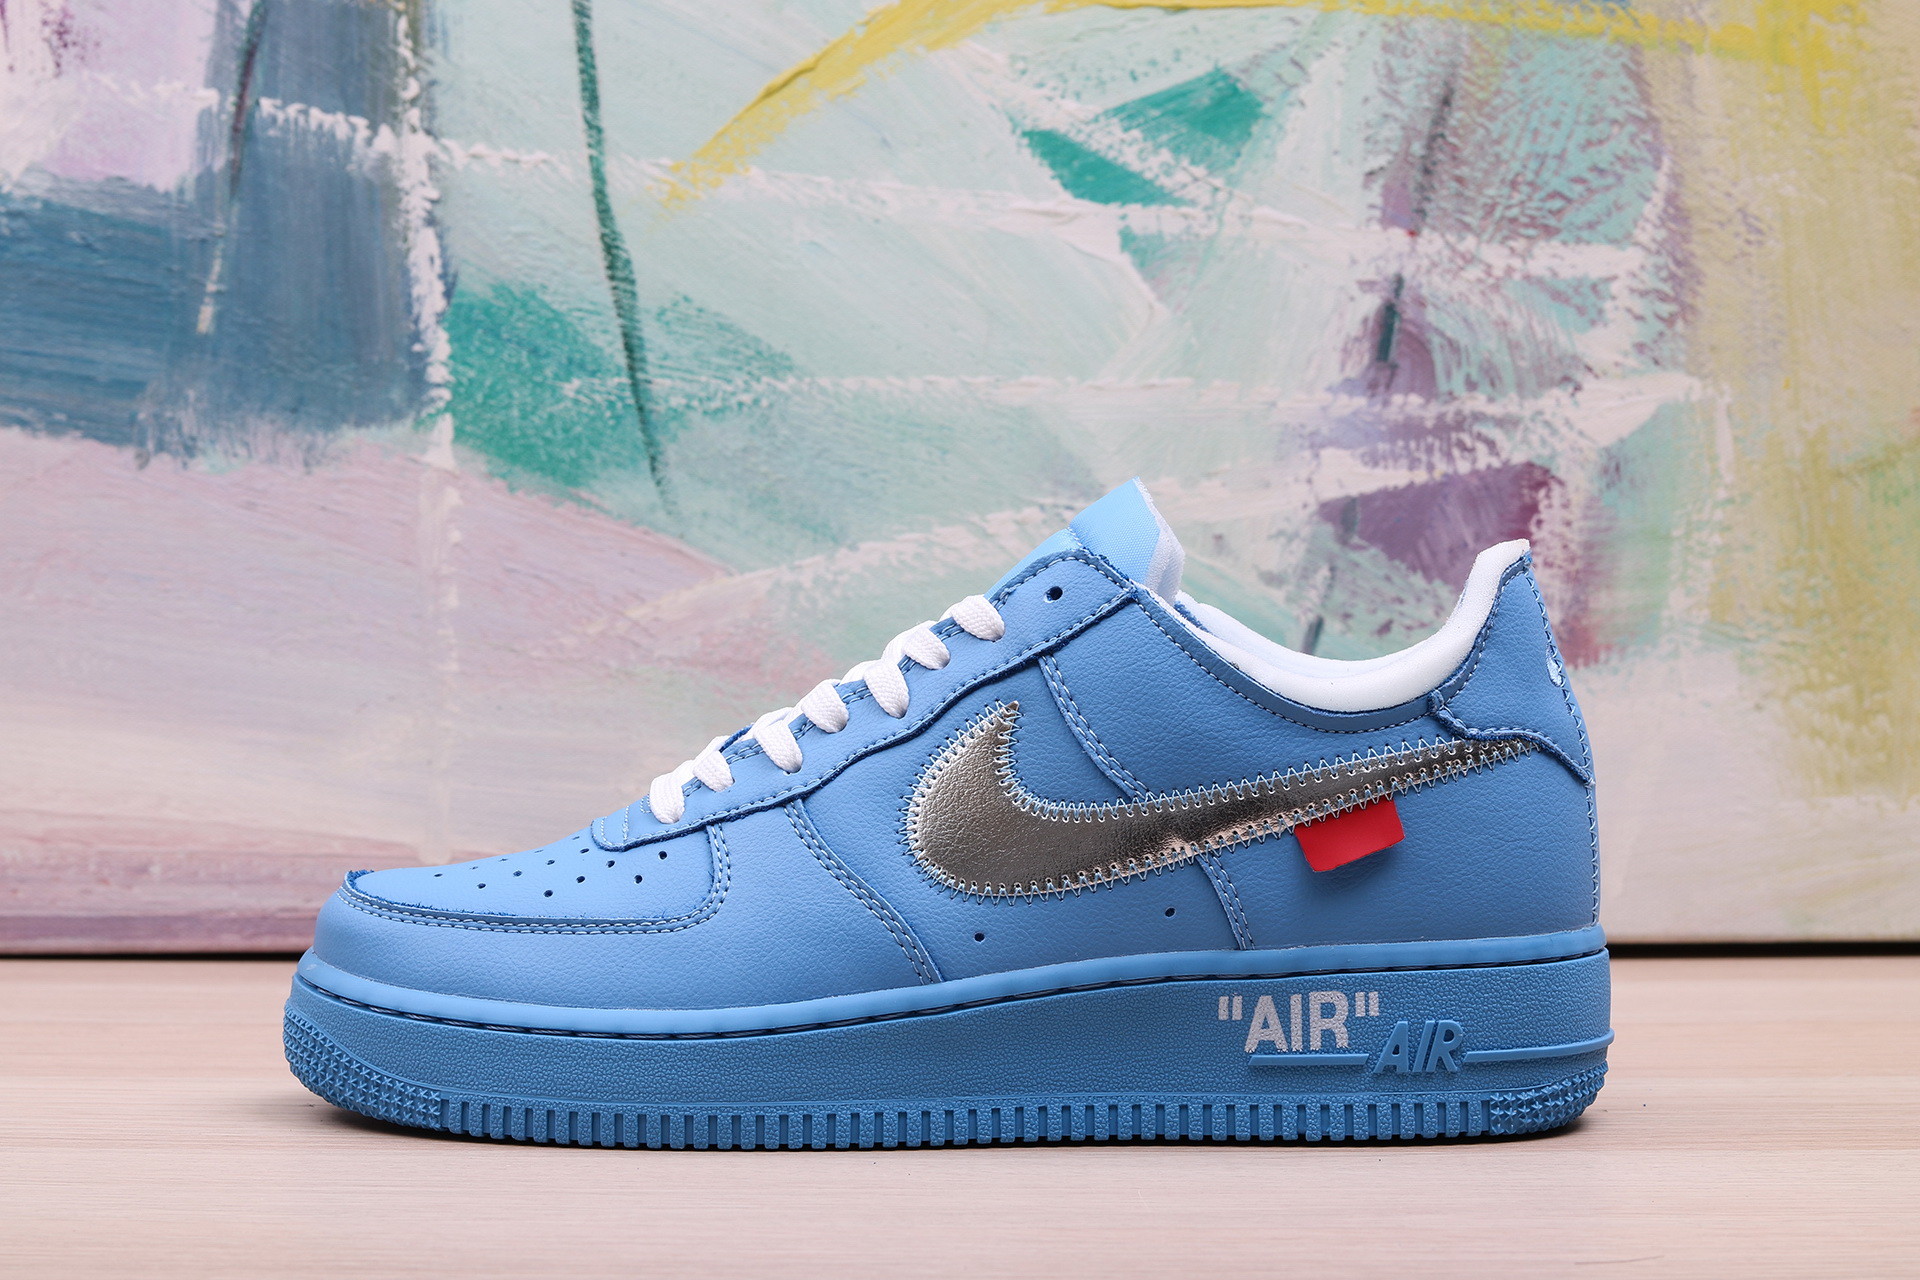 Unisex Off White x Nike Air Force 1 07 MCA CLR3023 Nike Sneakers online discount for sale